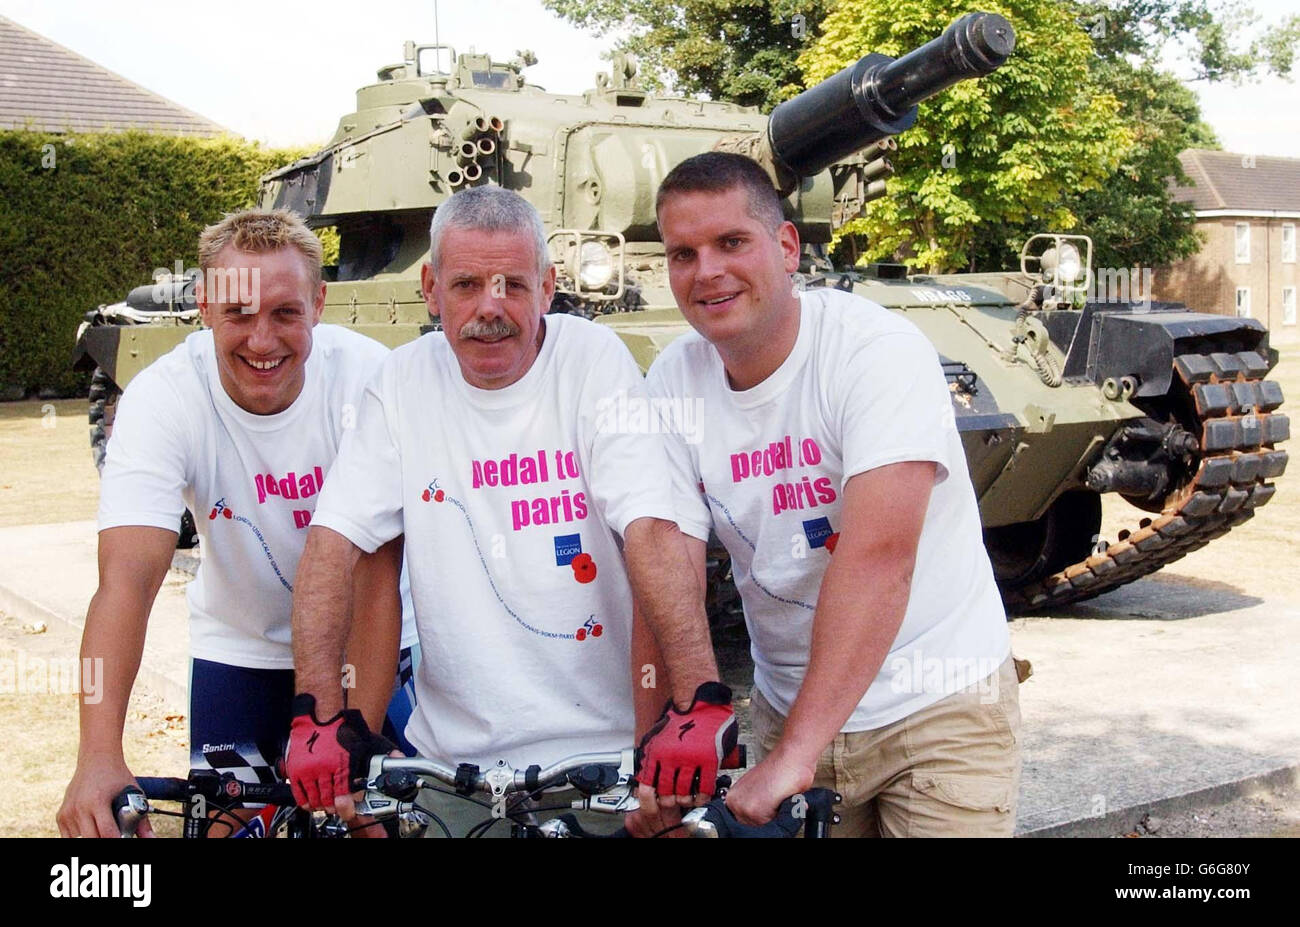 Curly Turrington (centre), 54, from Cambridge, who's son was killed while serving in Iraq earlier this year, poses at Bassingbourn Barracks in Hertfordshire with his colleagues Jamie Lidlow (left) and Captain Adam Briggs, on the bicycles they intend to ride to Paris this week to help raise money for the Royal British Legion. Mr Turrington, who works at the Barracks, will make the journey in memory of his son Kelan who was killed in action in Basra in April. Stock Photo